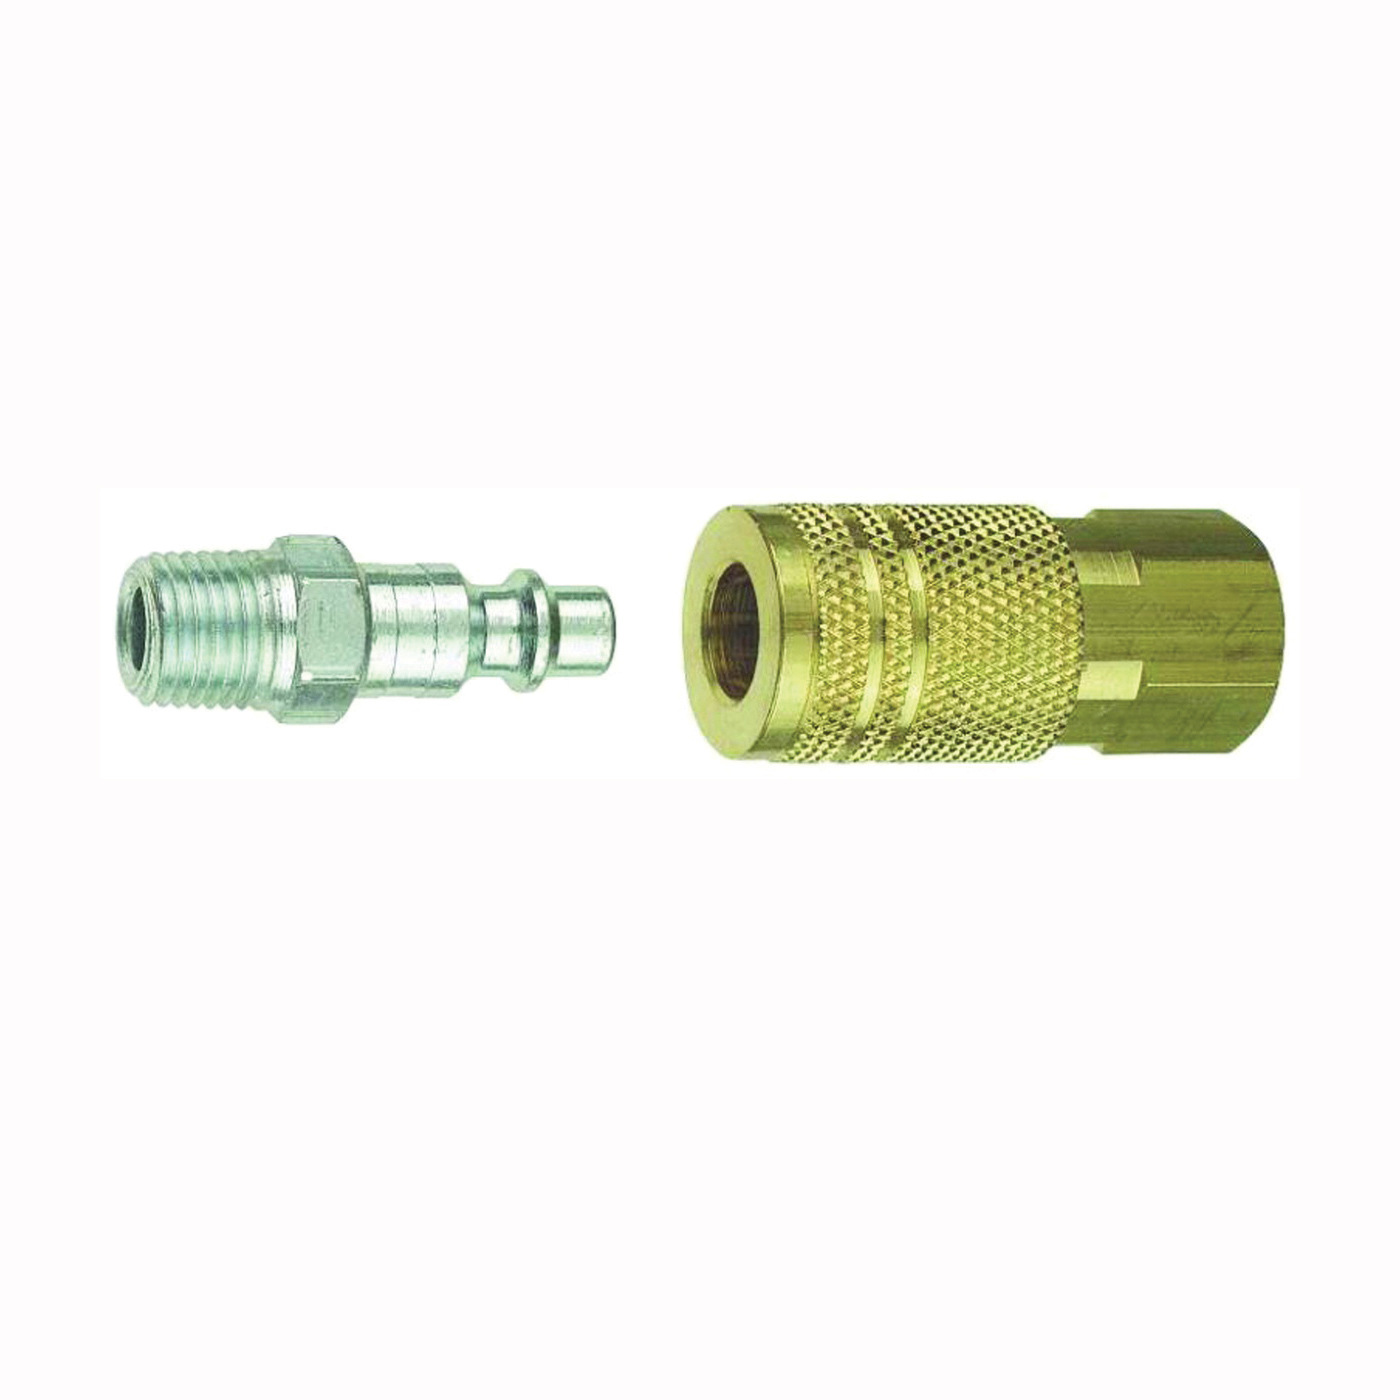 13-101 Coupler and Plug Set, 1/4 in